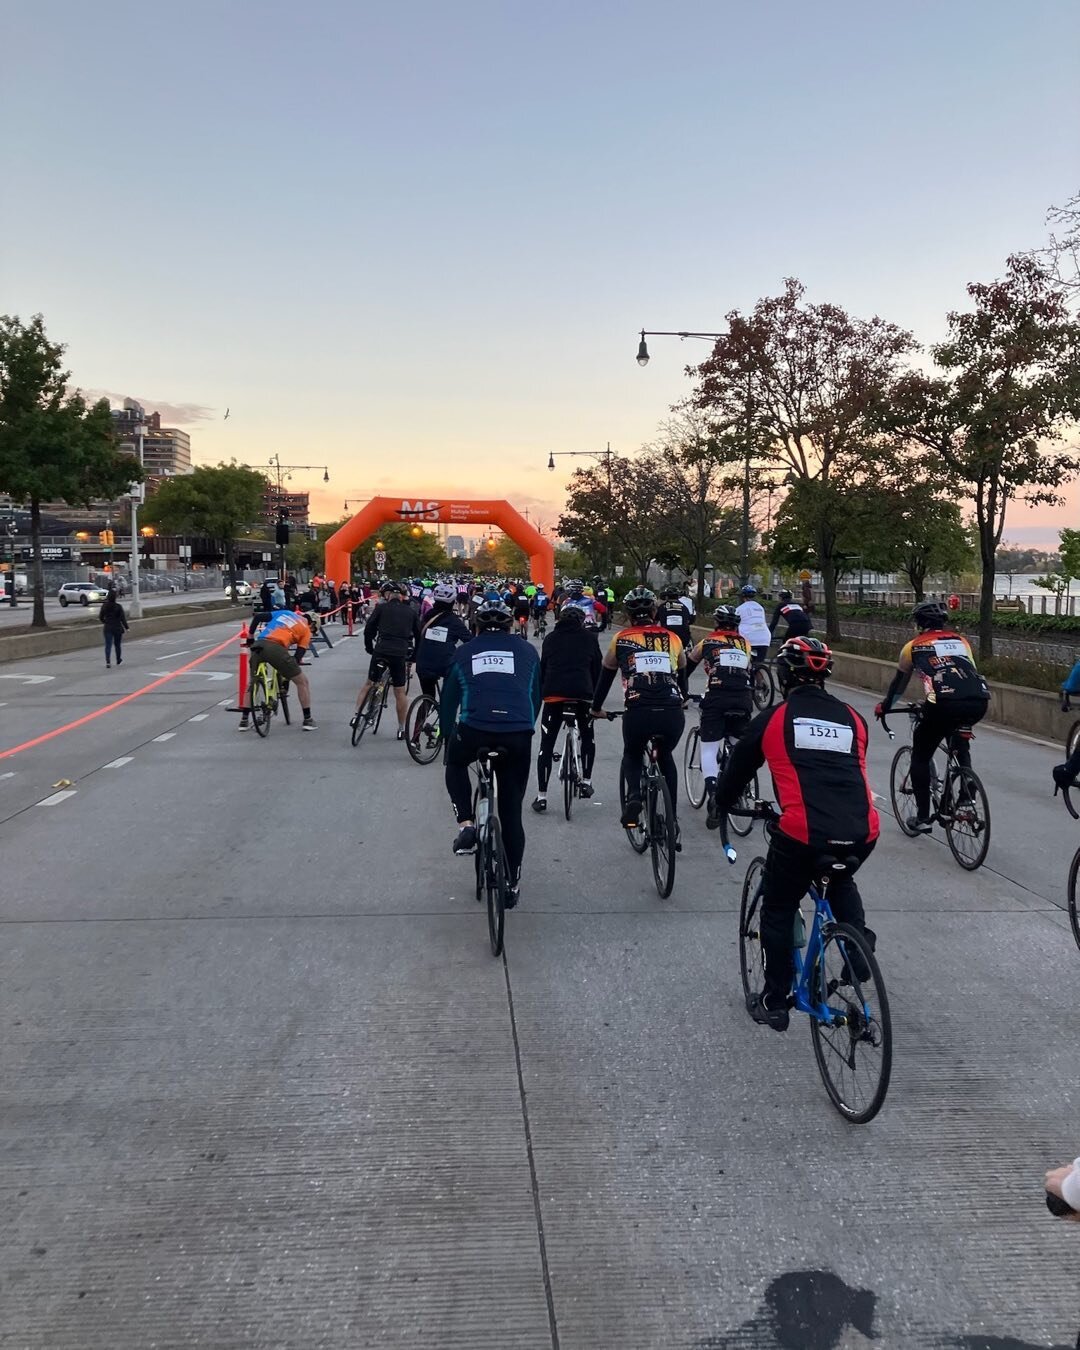 It was great (and a bit exhausting at times) biking in the 50 mile @bike_ms event this past weekend in honor of my Dad. #NYC #bikems @mssociety